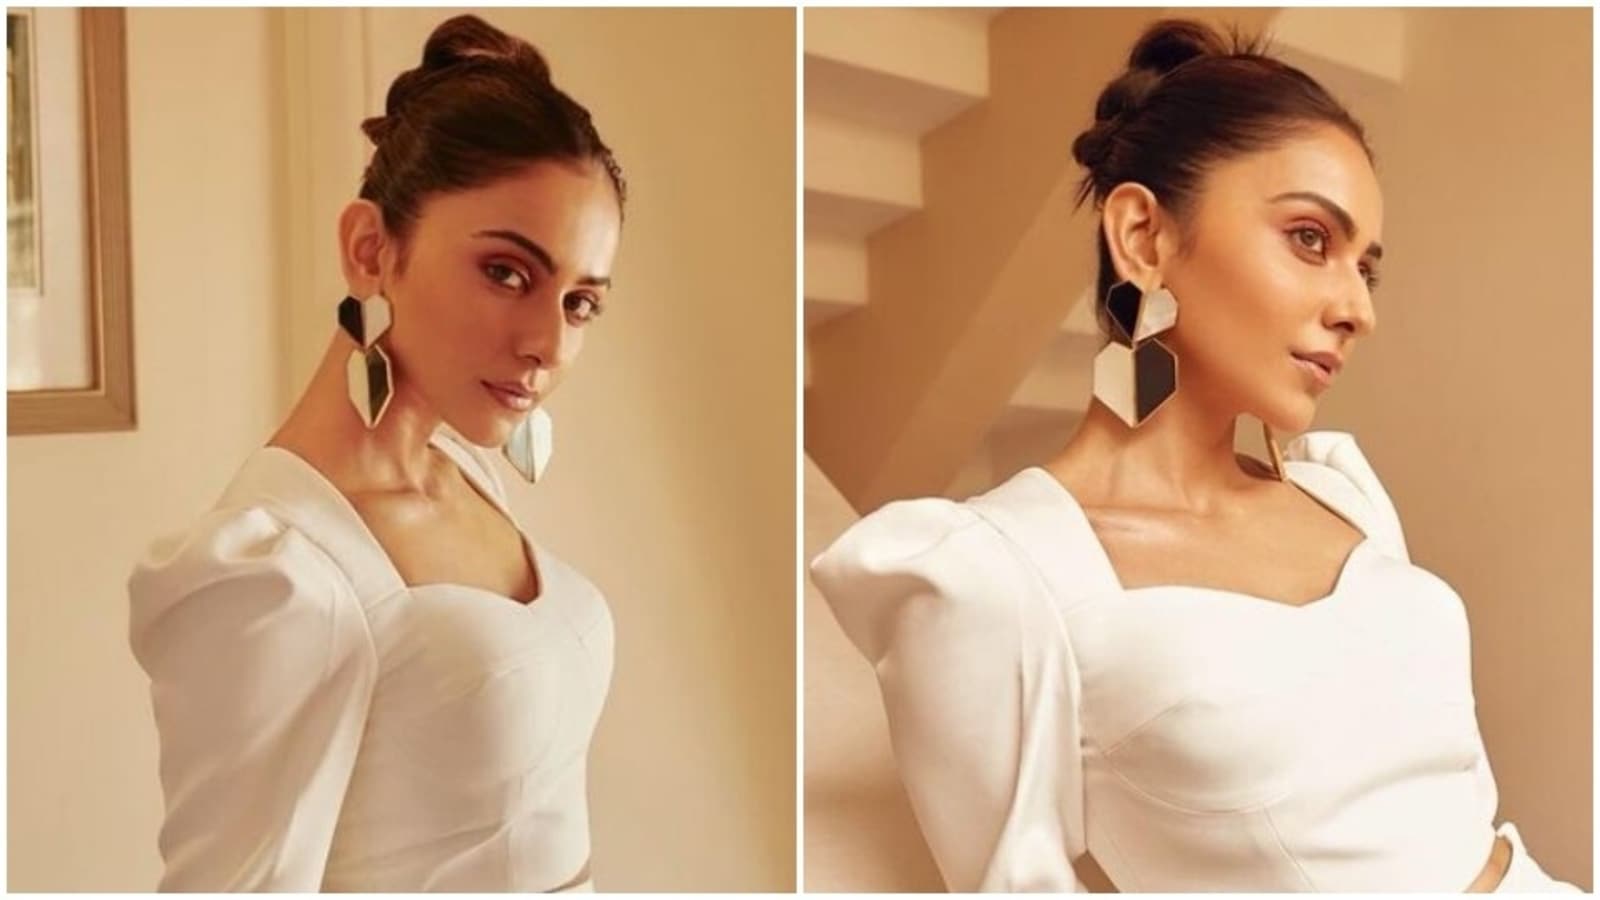 Rakul Preet Singh is ready to steal the show at Runway 34 promotions in bustier top and bodycon skirt: See pics